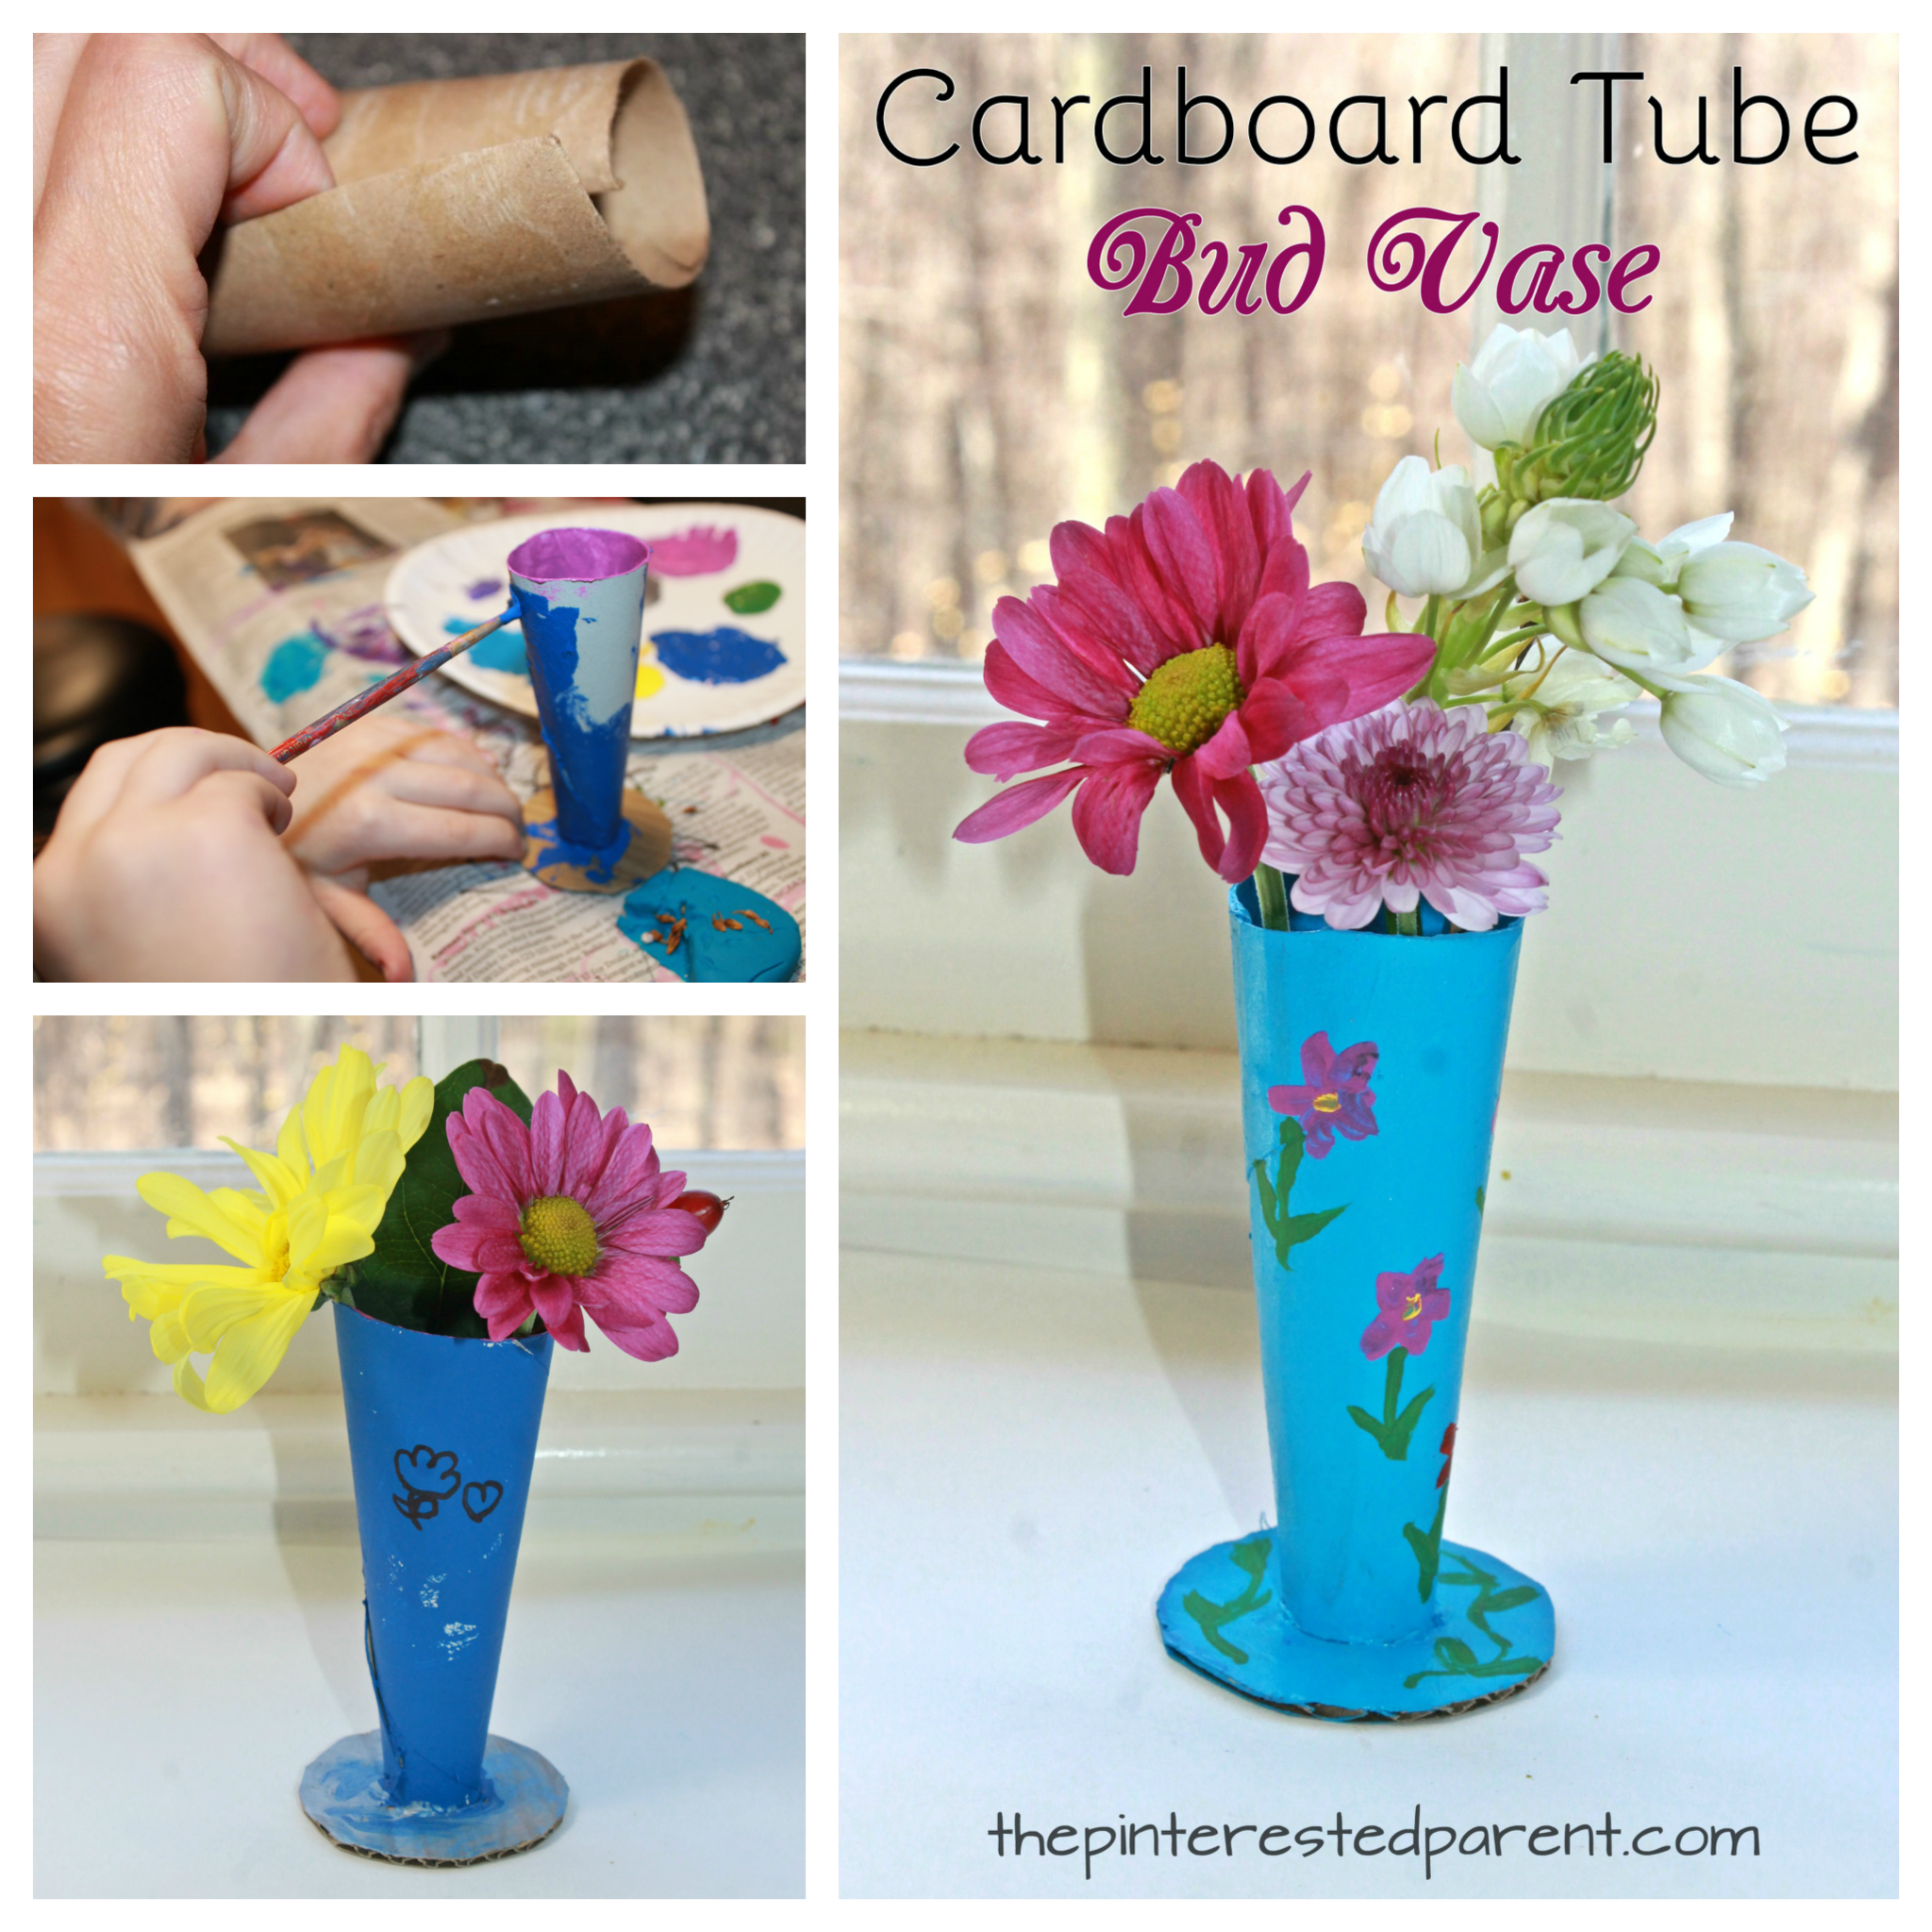 Cardboard tube flower bud vase. This is a great idea for Mother's Day or Valentine's. Recyclable arts and crafts for kids.